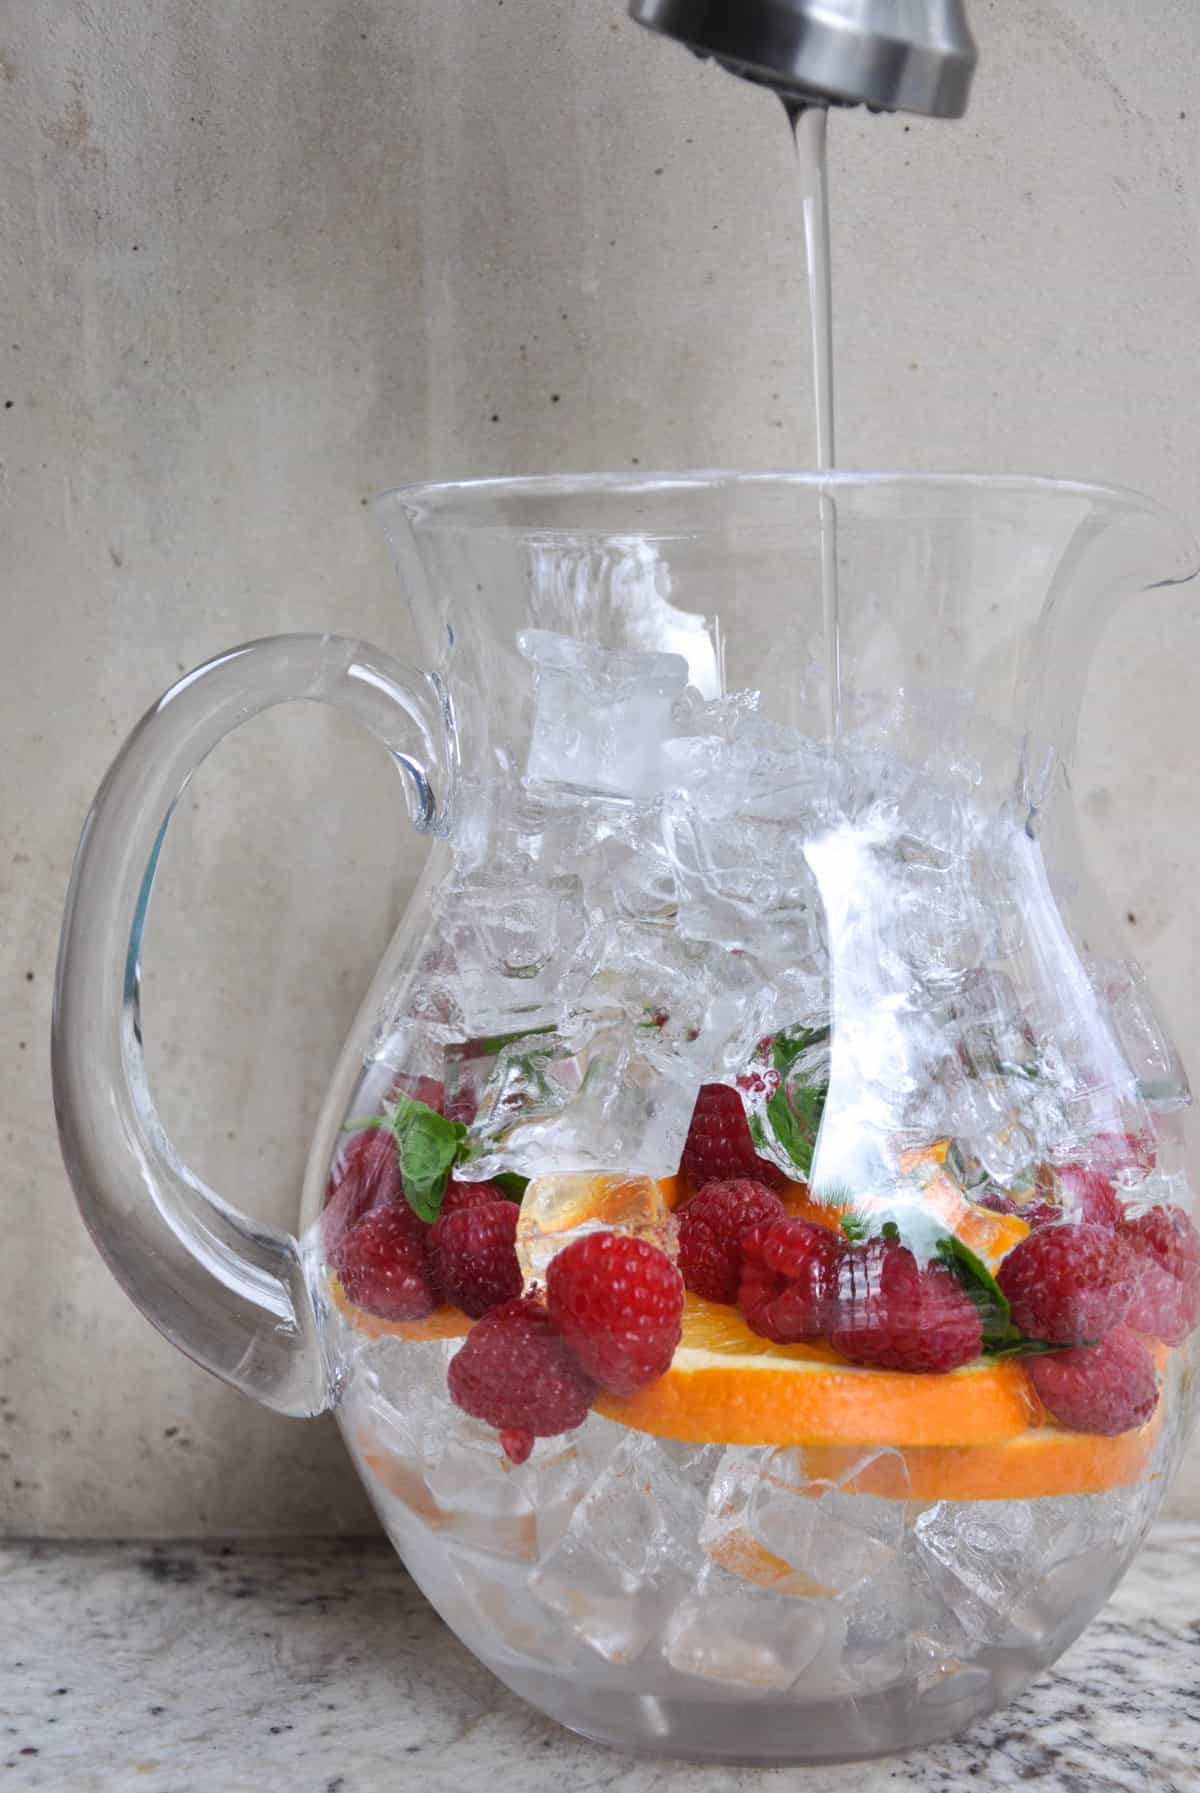 Pitcher with raspberries, mint, and orange slices